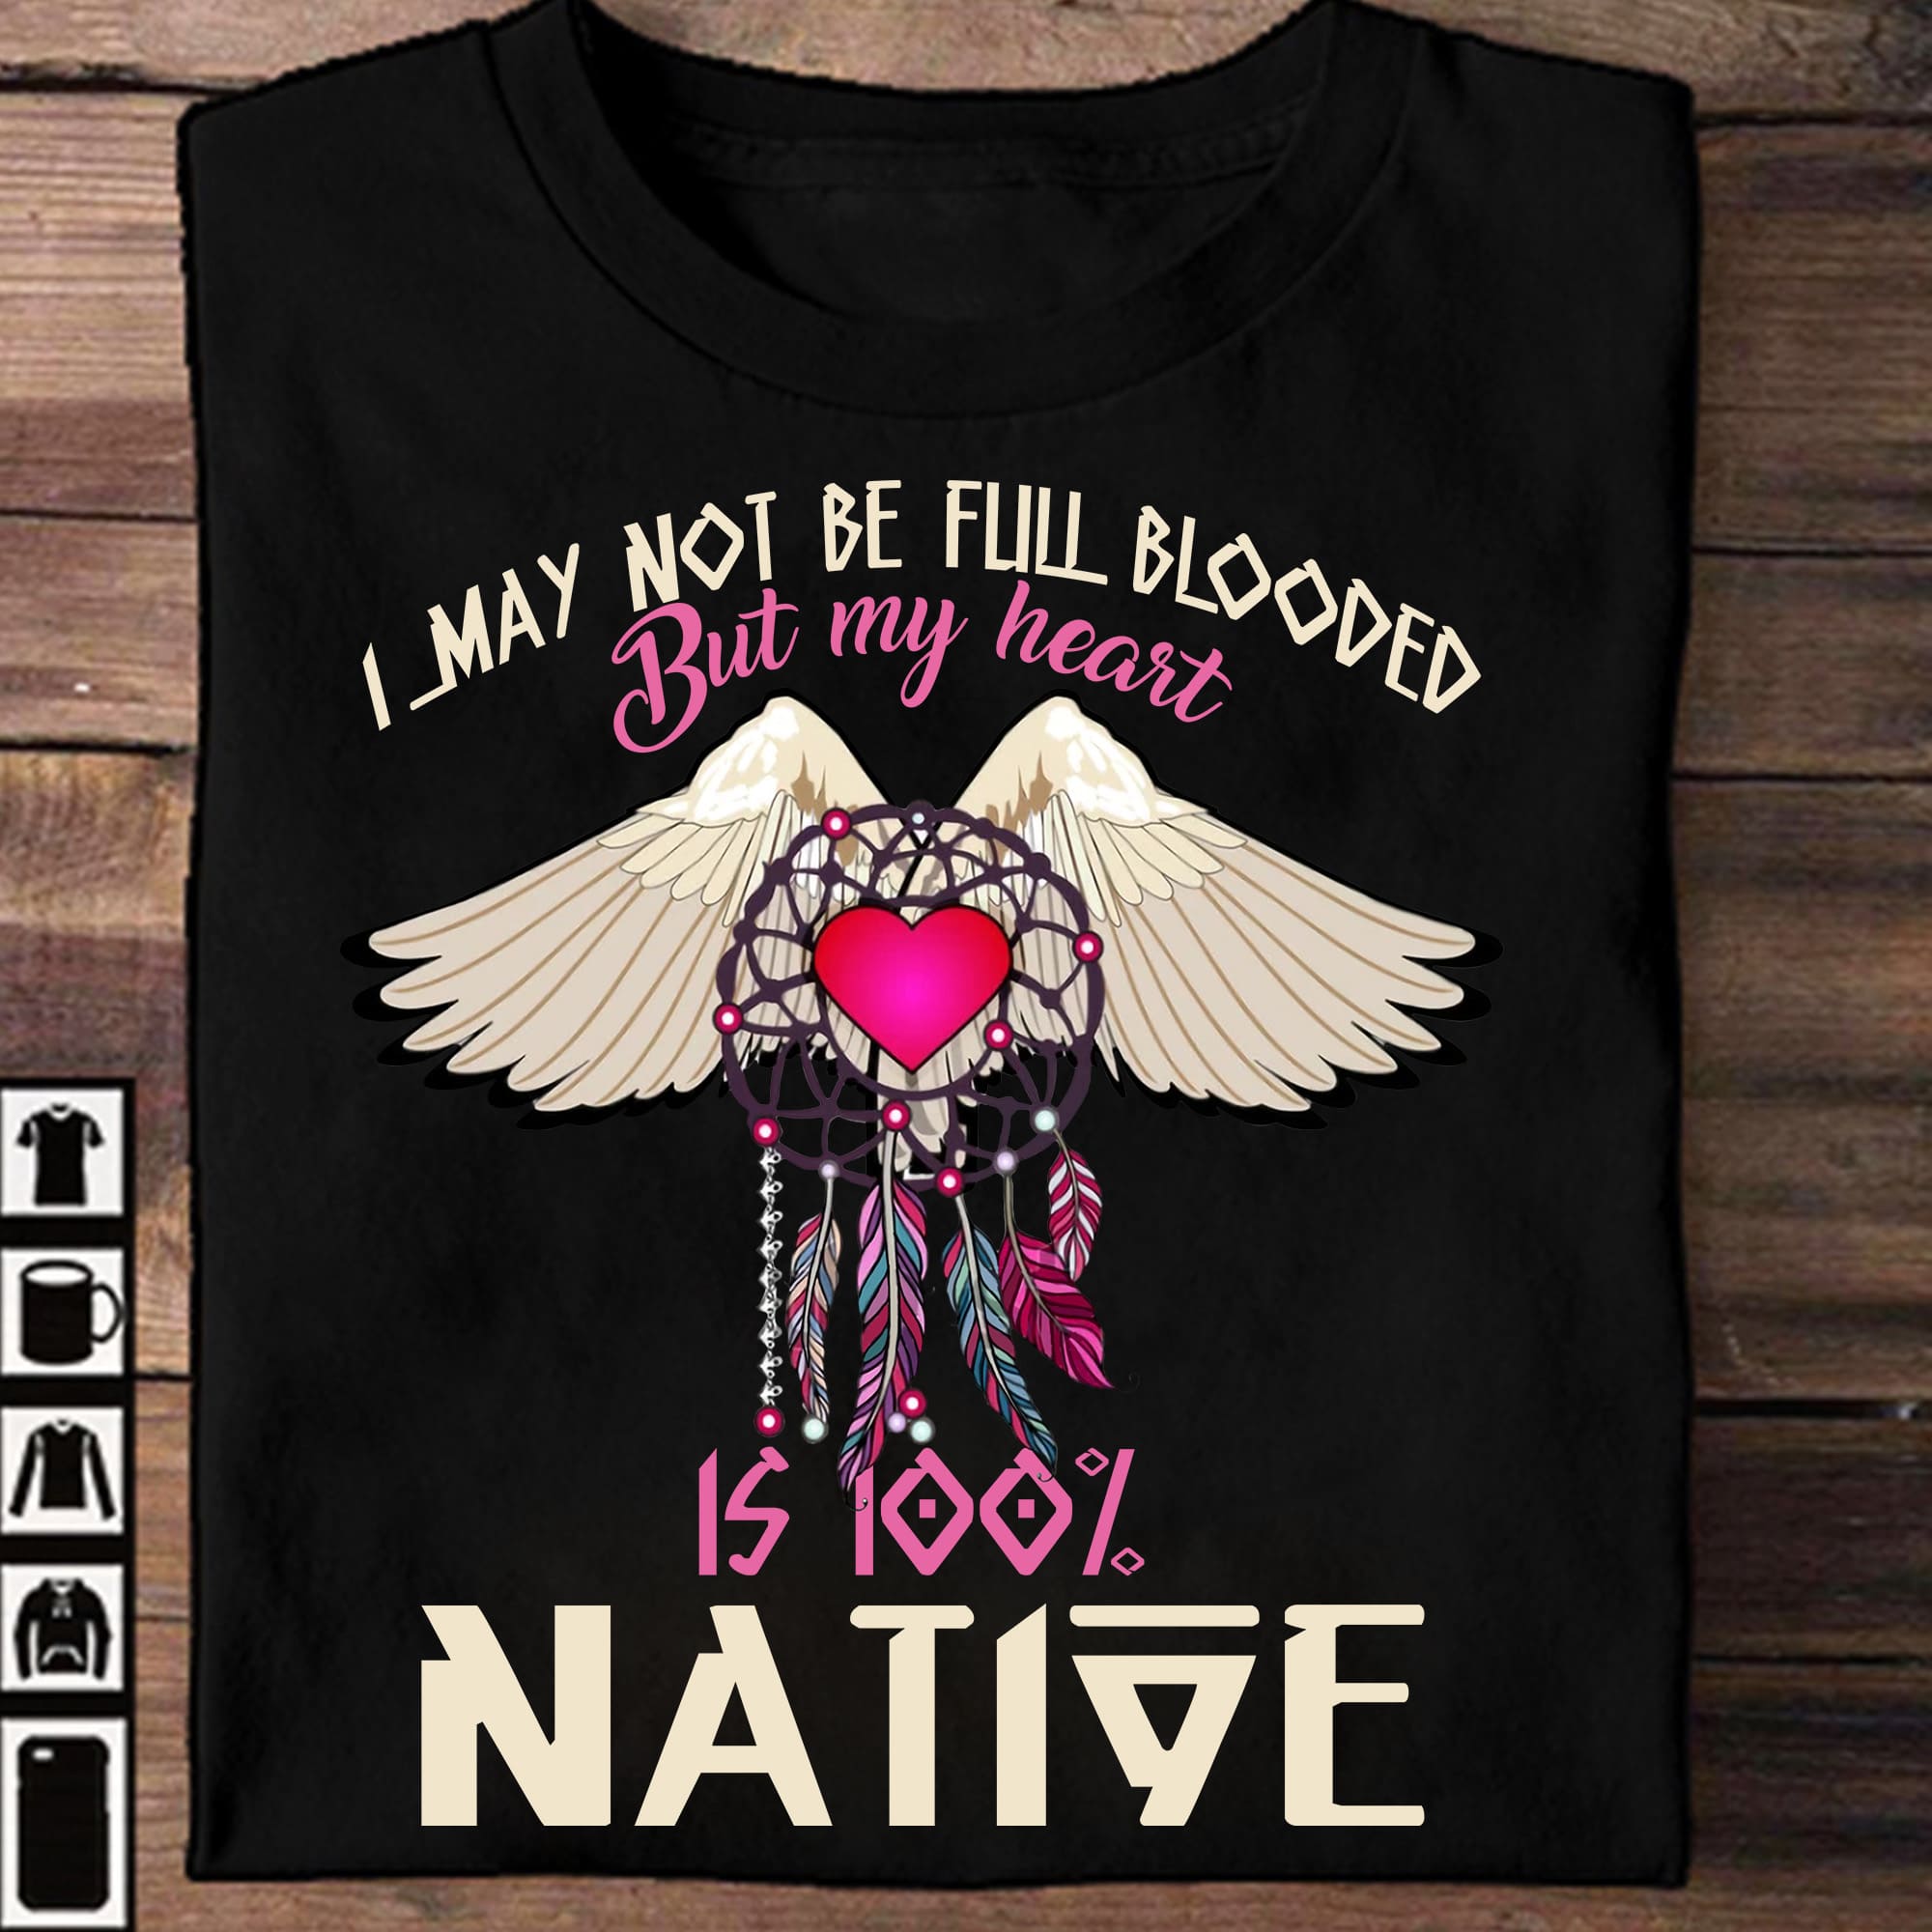 Angel Wing Native Dreamcatcher - I may not be full blooded but my heart is 100% native